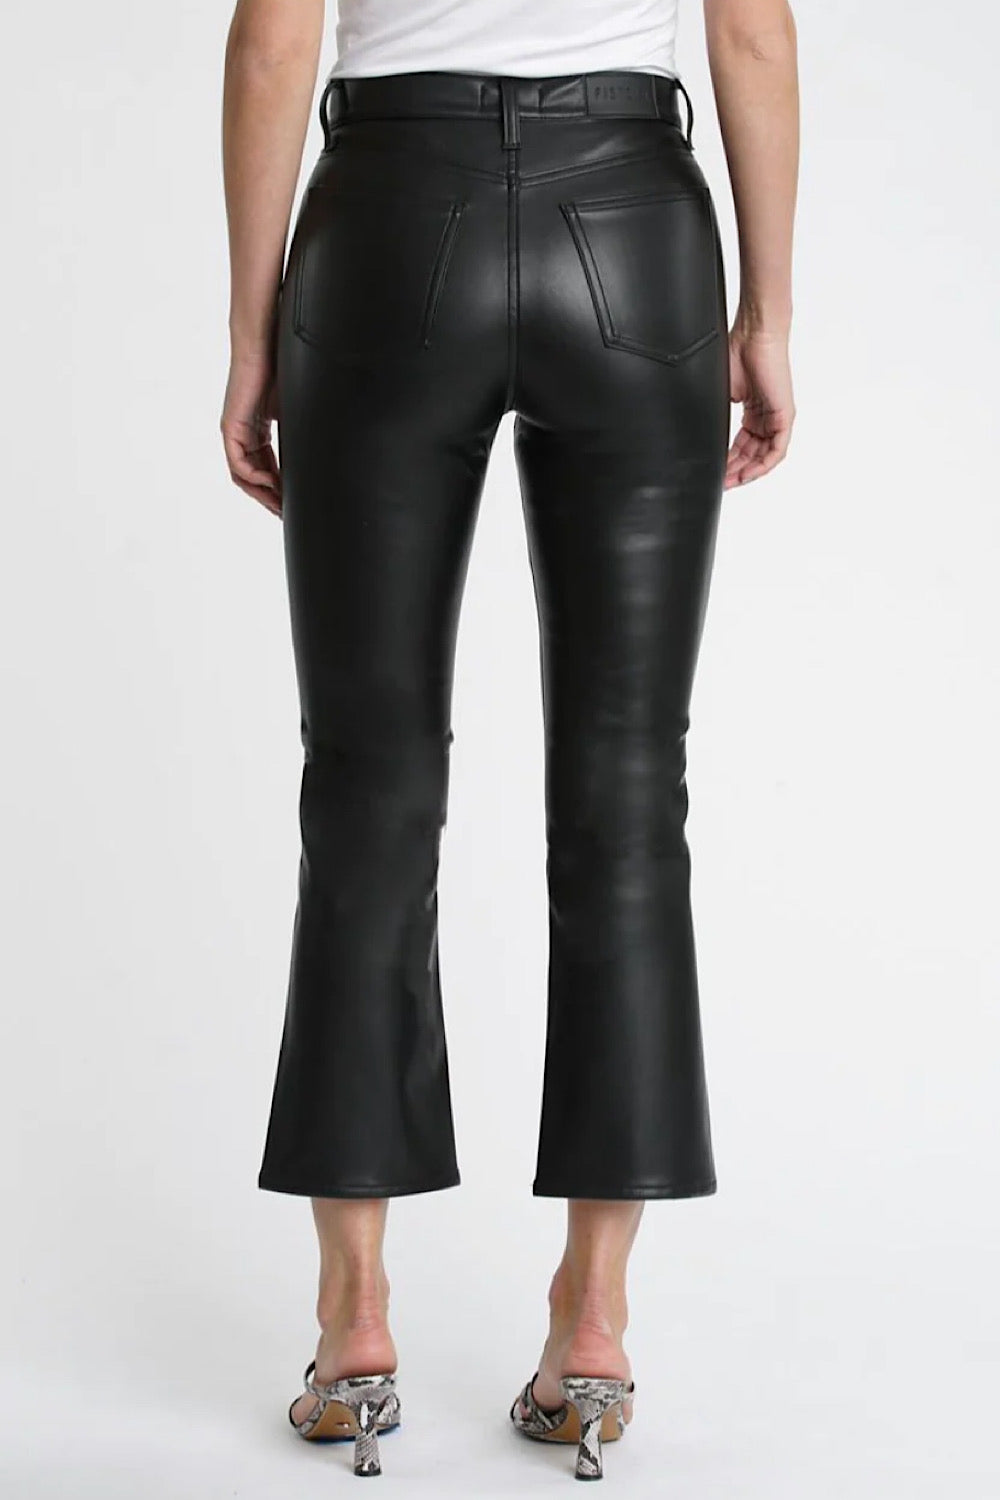 LENNON FAUX LEATHER CROP IN SLATE BLACK – The Spruced Goose Boutique ...